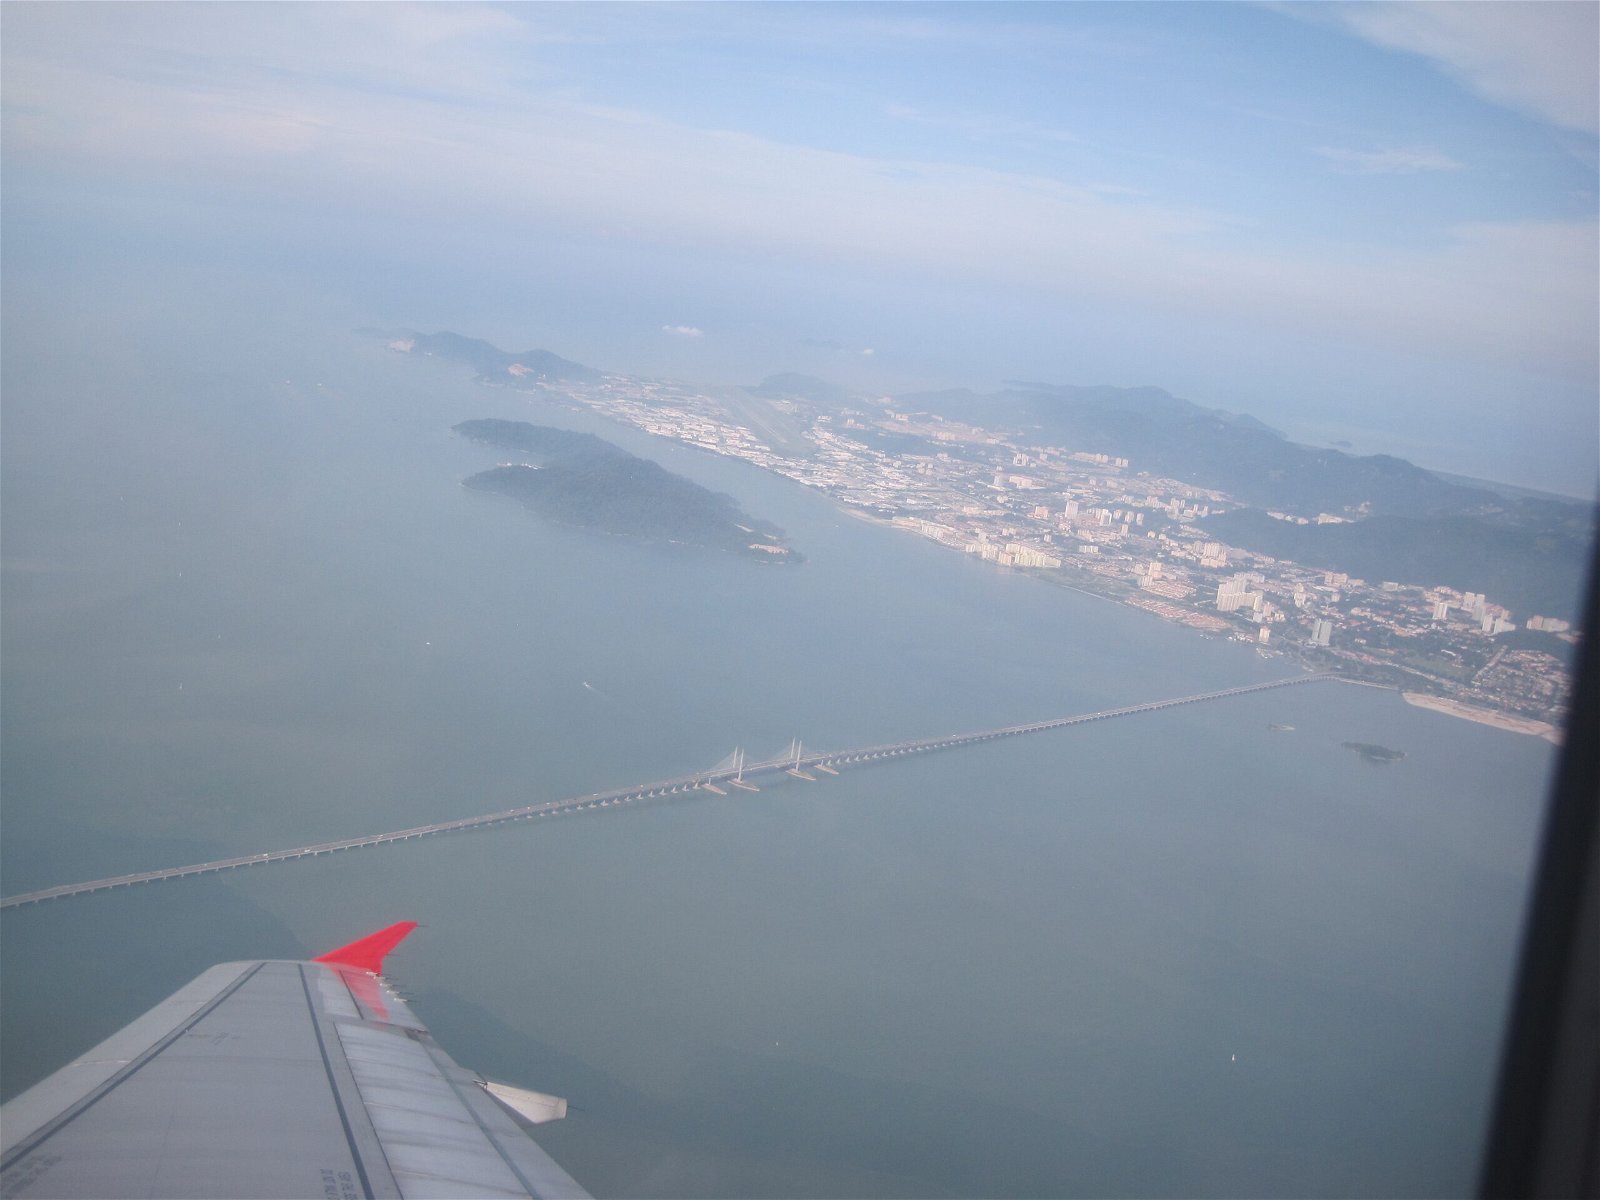 Pulau Penang from the Air